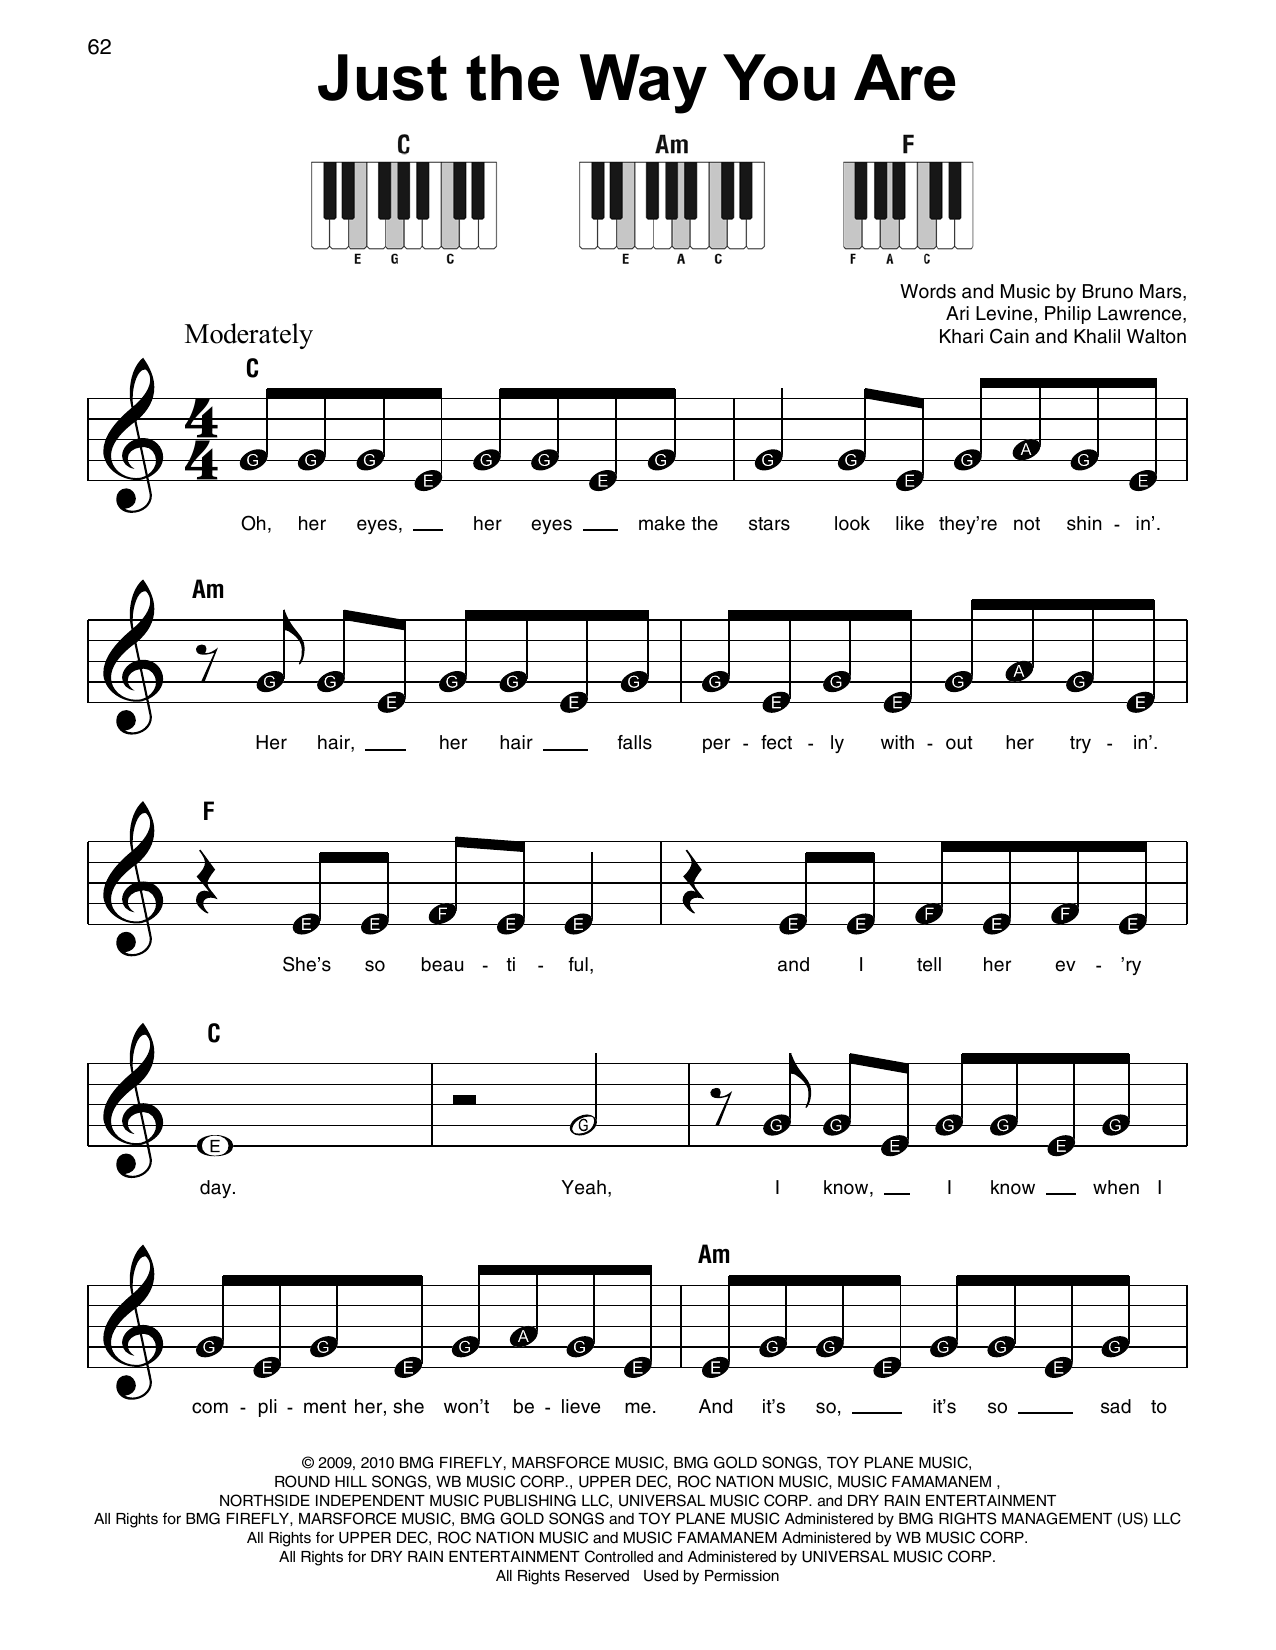 Bruno Mars "Just The Way You Are" Sheet Music | Download Printable PDF